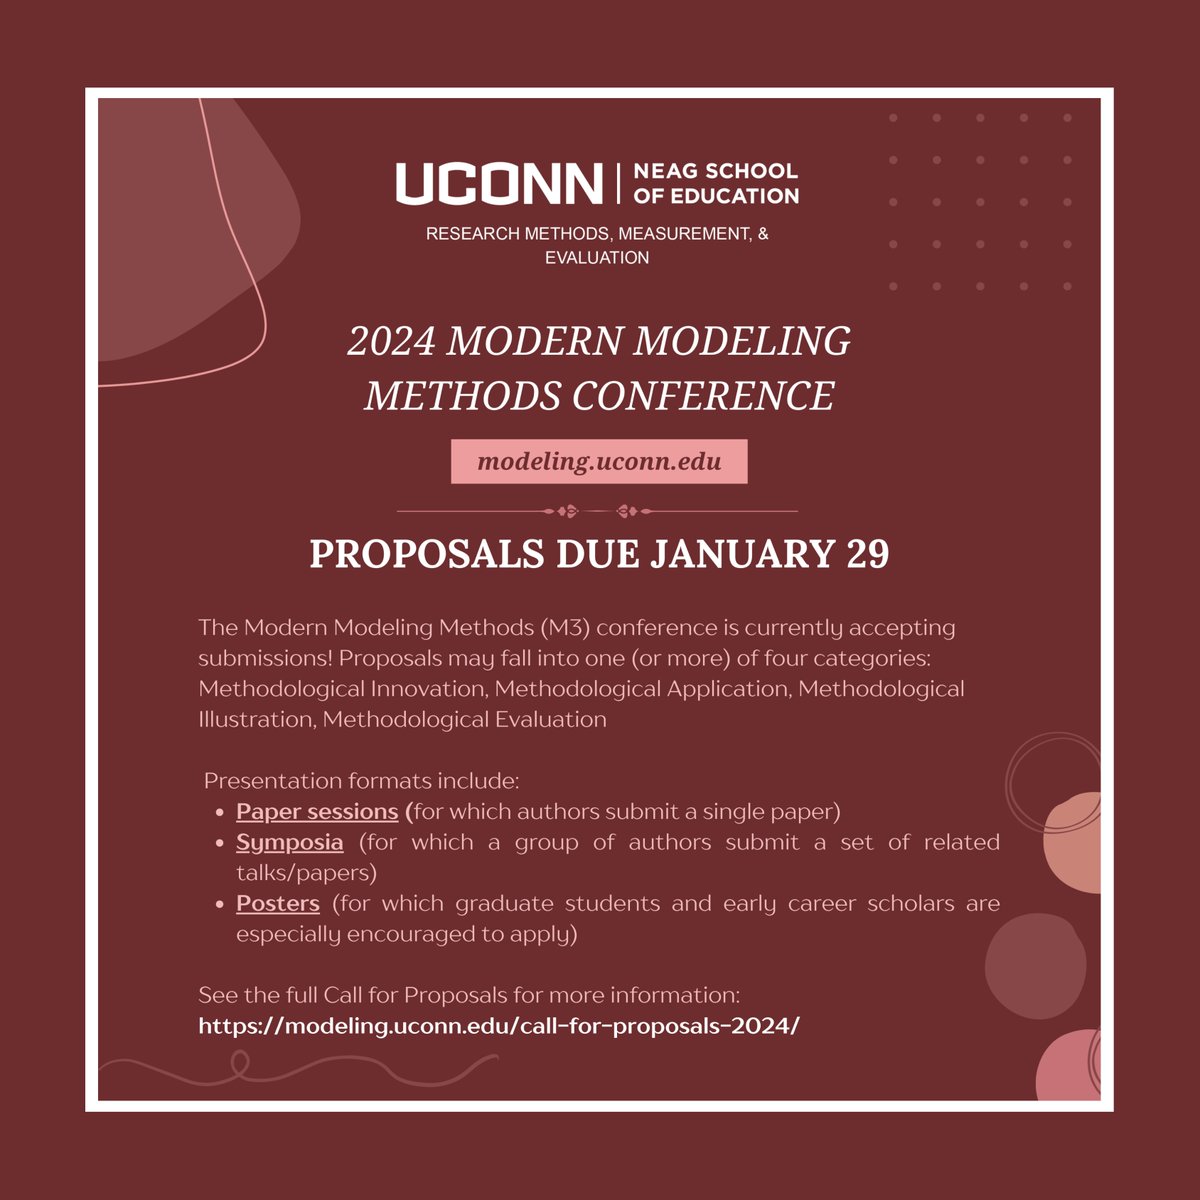 Now accepting proposals for M3 2024!
#Apply Early
#ApplyNow
#ModelingUConn

modeling.uconn.edu
rmme.education.uconn.edu

#interdisciplinary #statisticalanalysis #statisticalmodeling #statistics #StatsTwitter